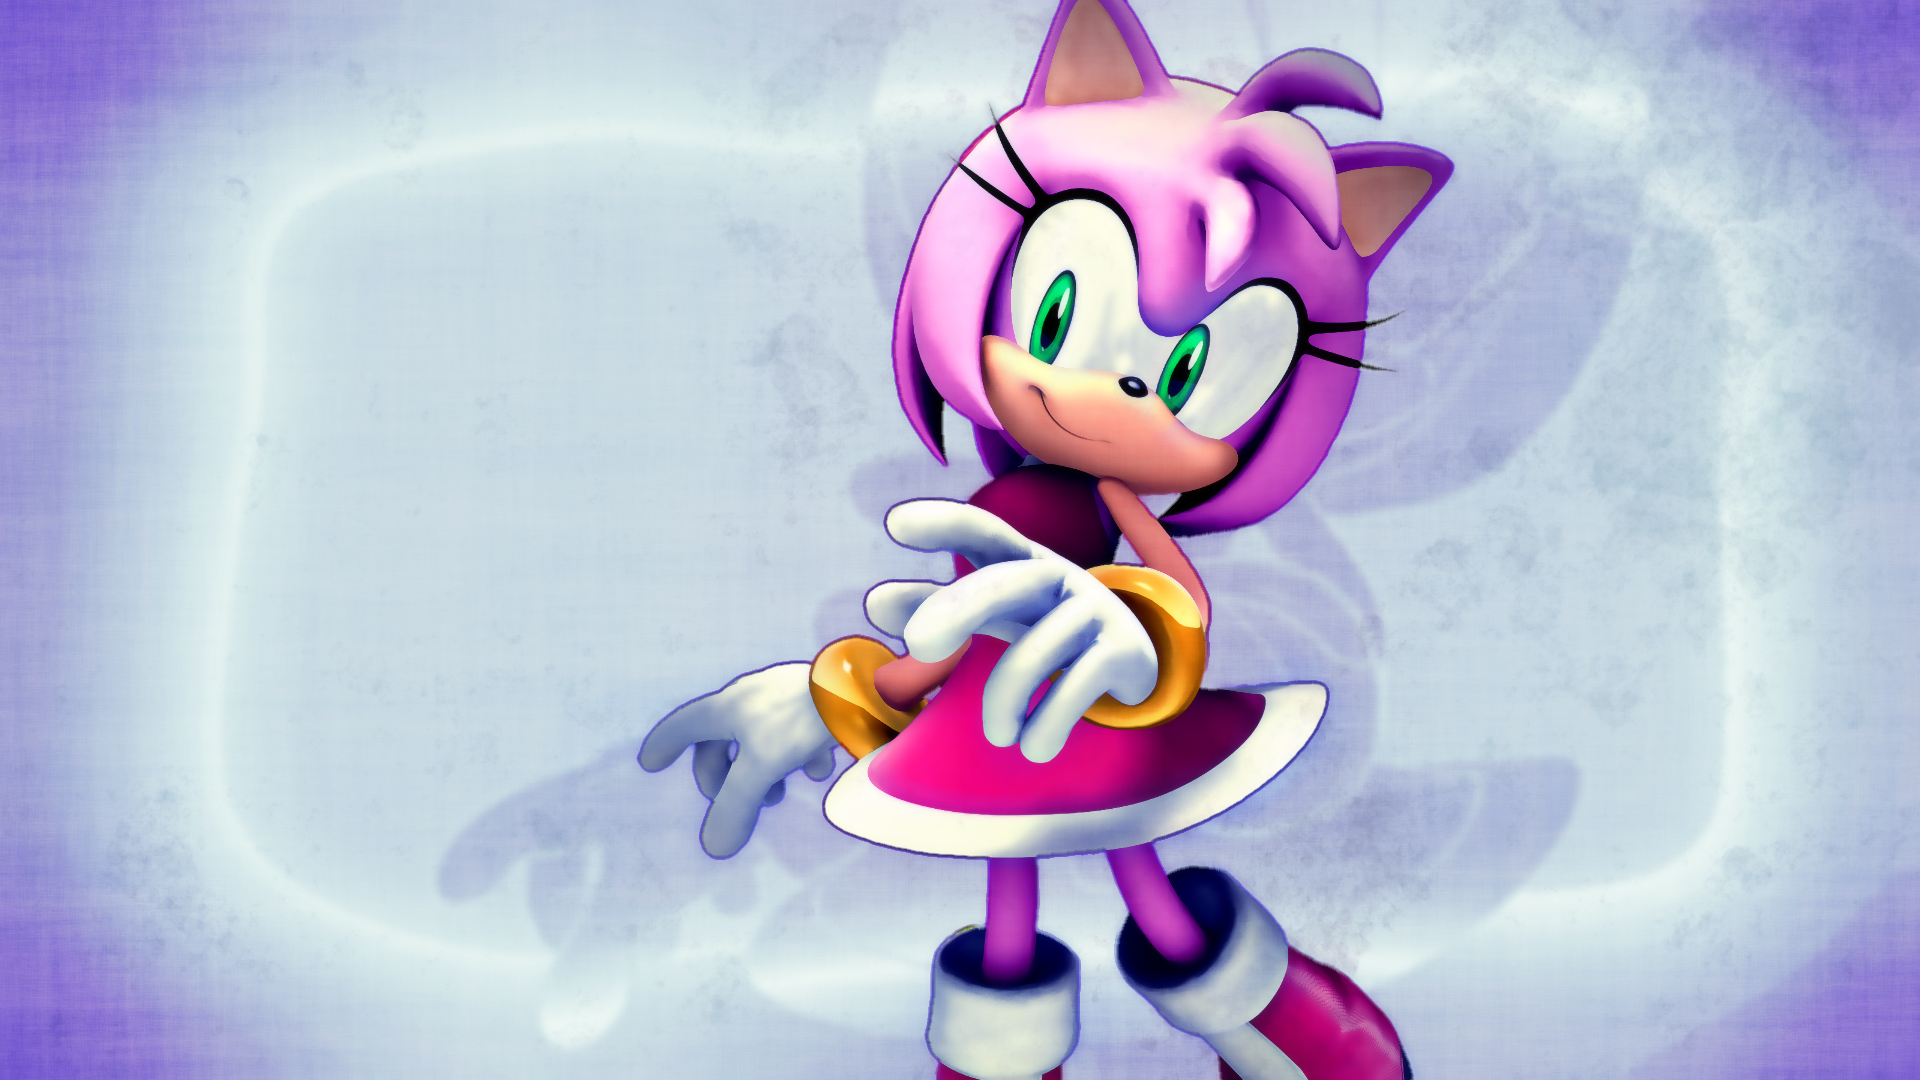 Cute Amy Rose Image - Amy Rose , HD Wallpaper & Backgrounds